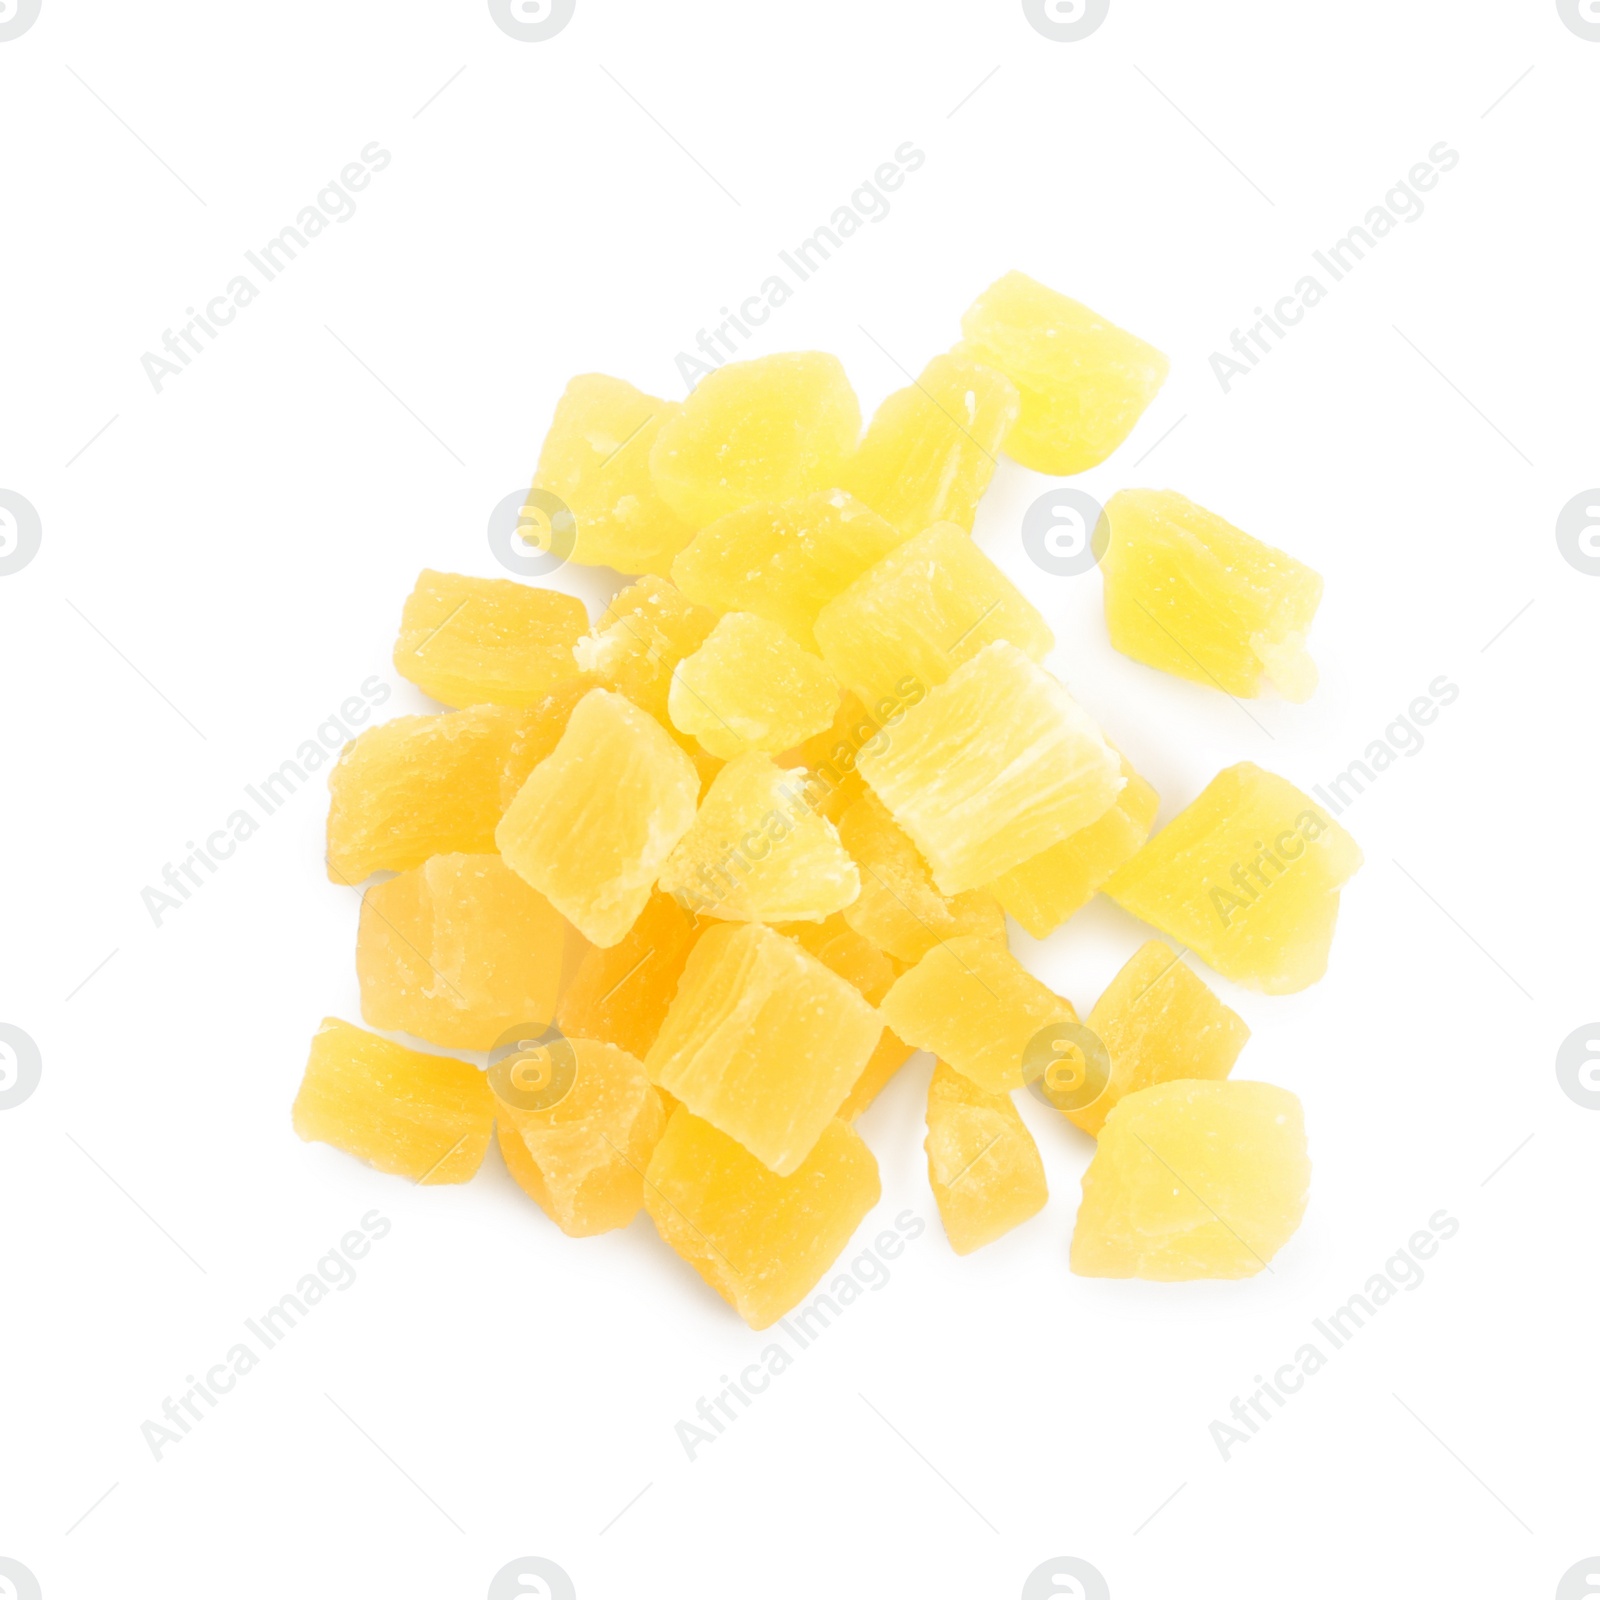 Photo of Delicious yellow candied fruit pieces on white background, top view